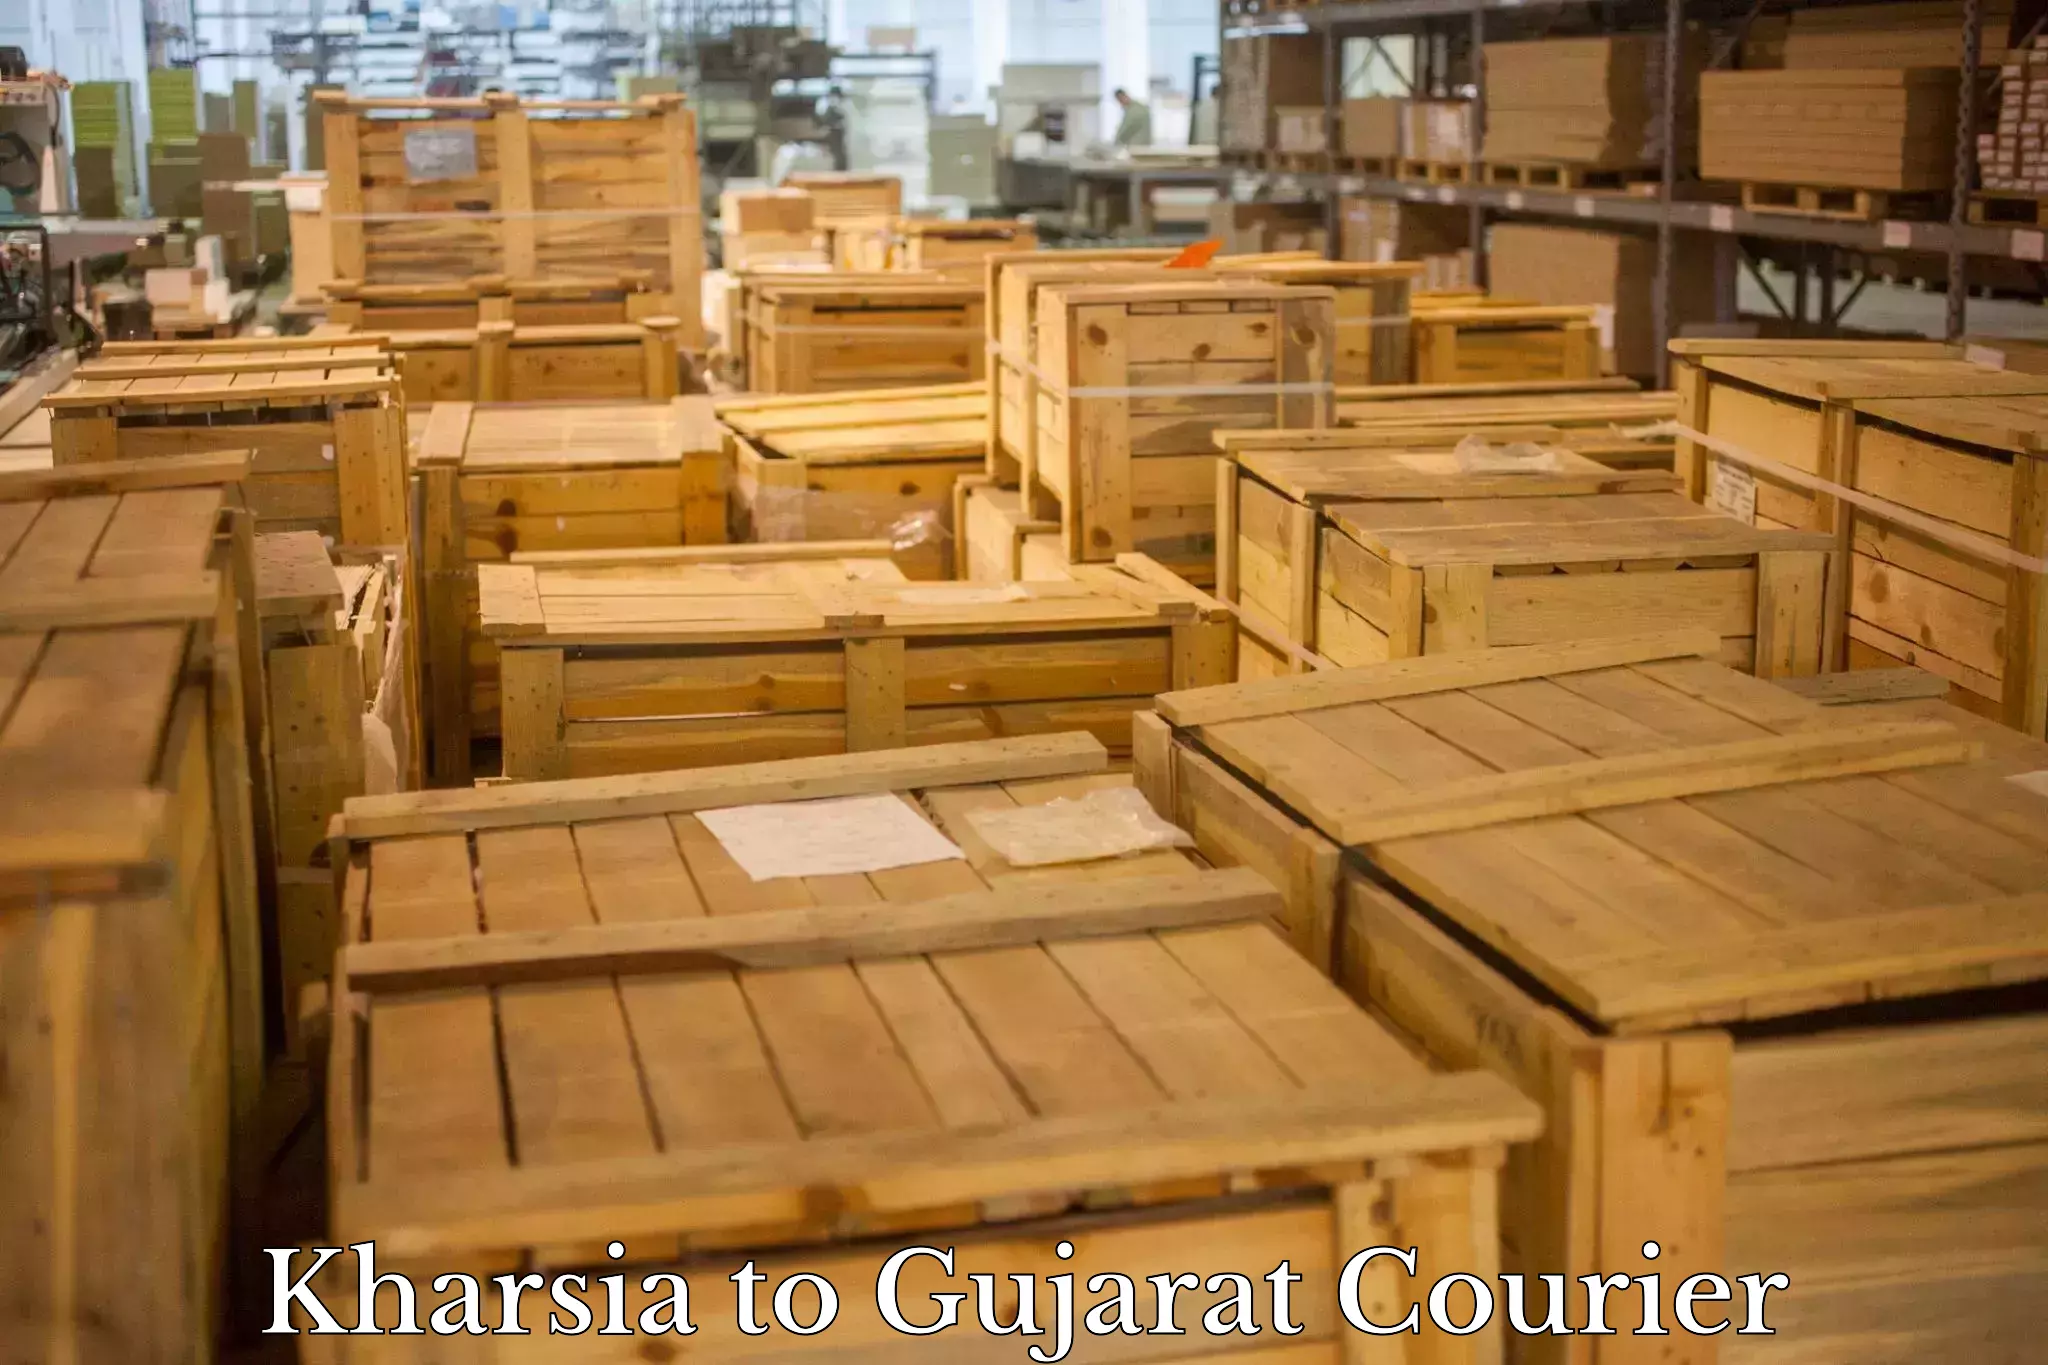 Multi-national courier services Kharsia to Anand Agricultural University